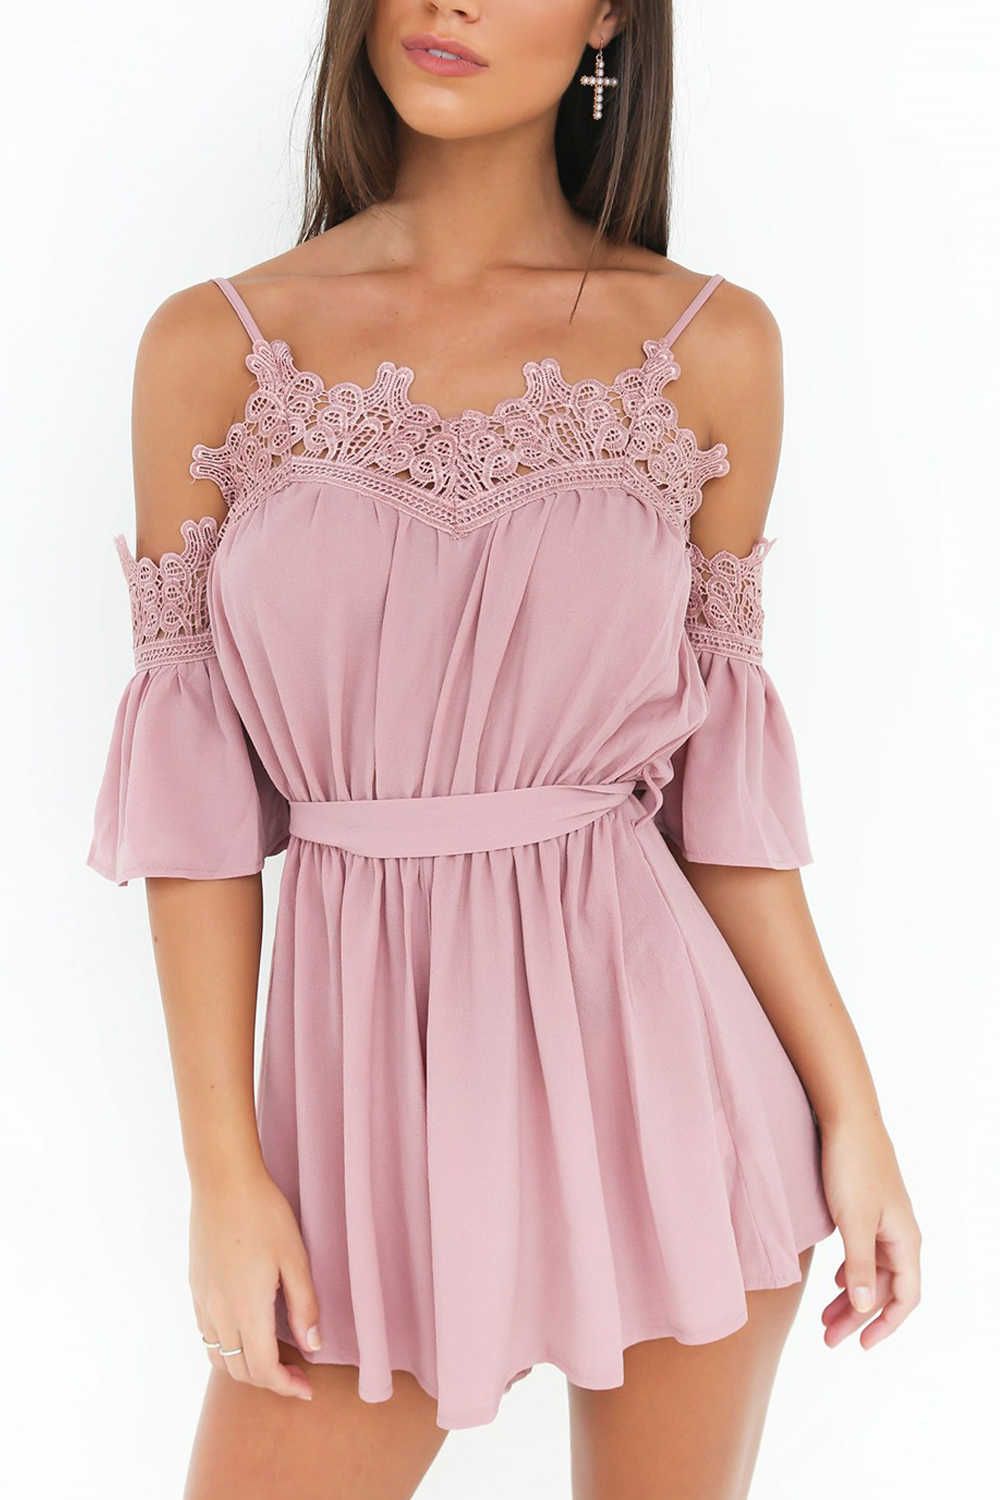 Iyasson Sexy Cold Shoulder Lace Trim Romper